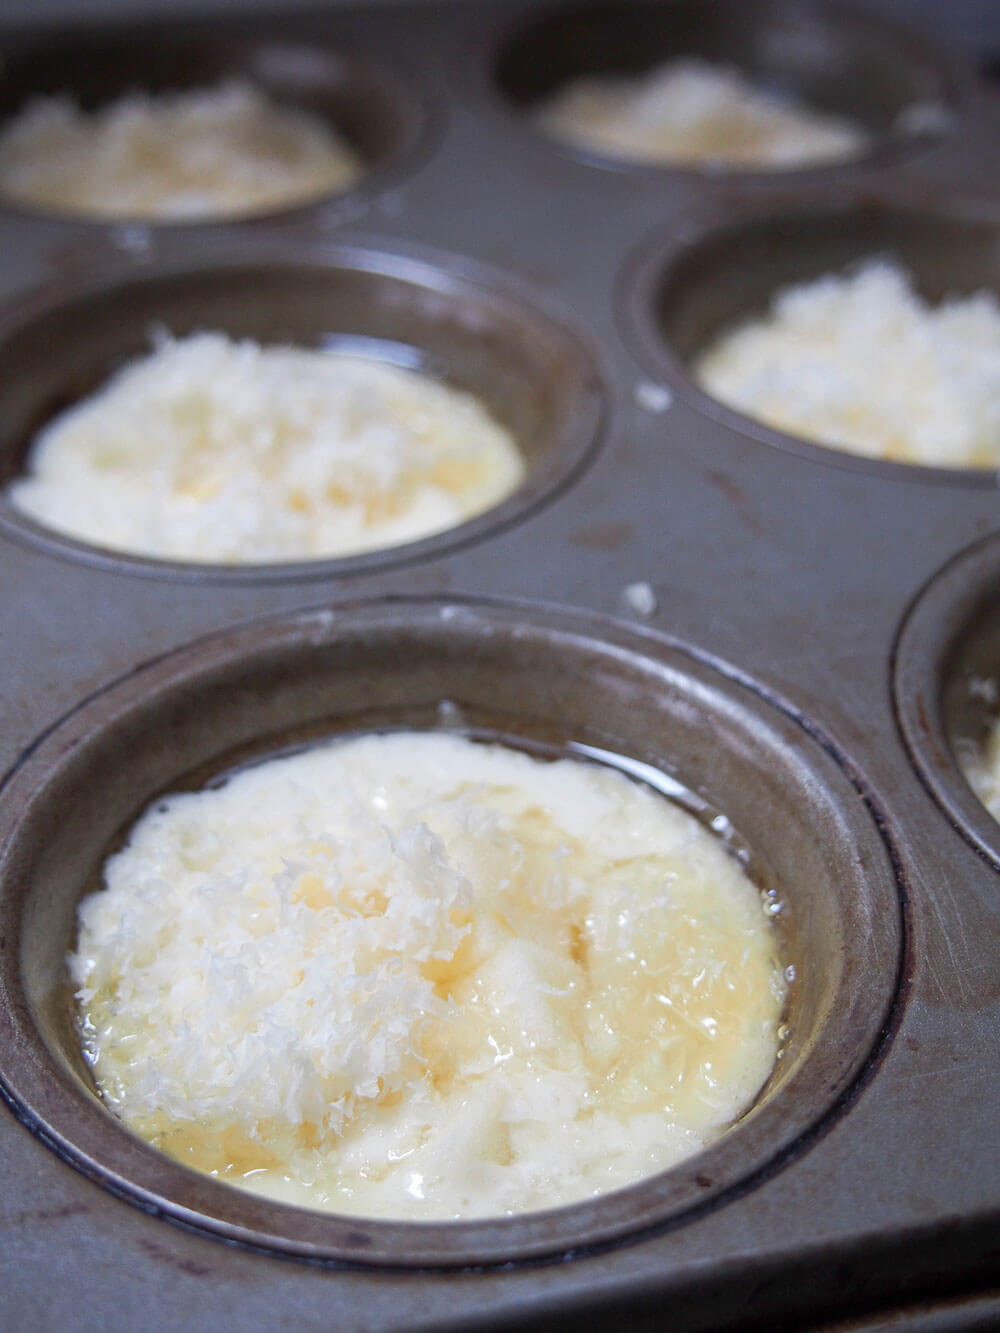 adding cheese and apple into batter before baking